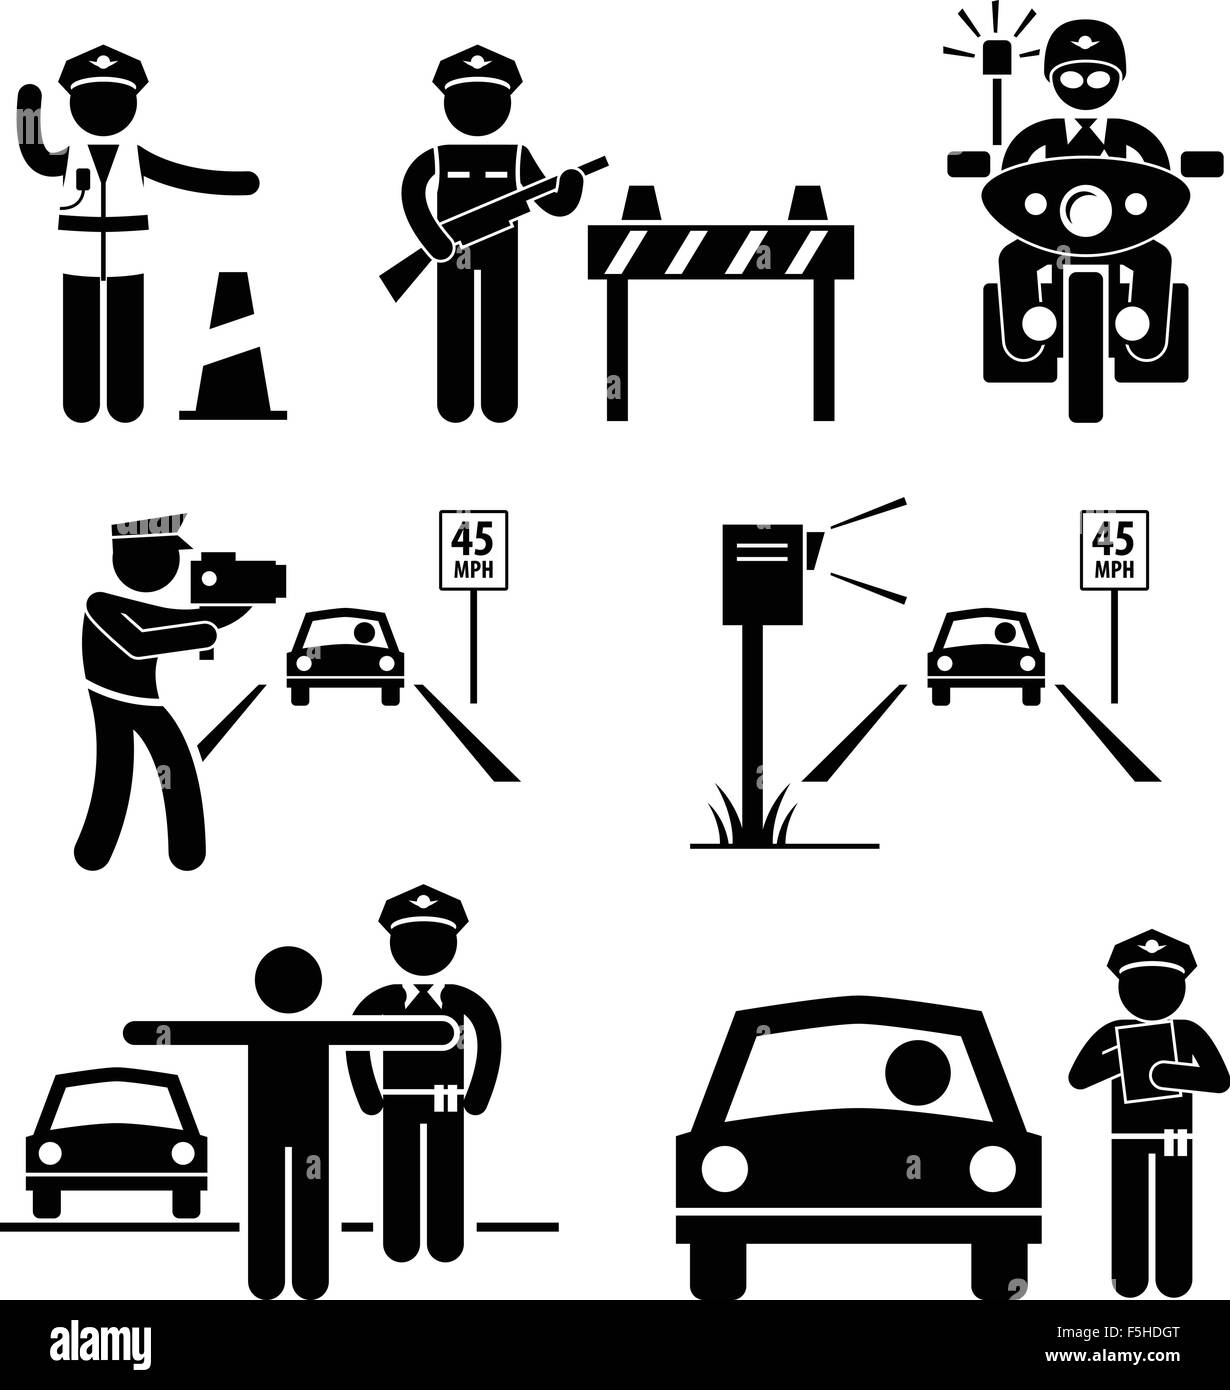 Police Officer Traffic on Duty Stick Figure Pictogram Icon Stock Vector